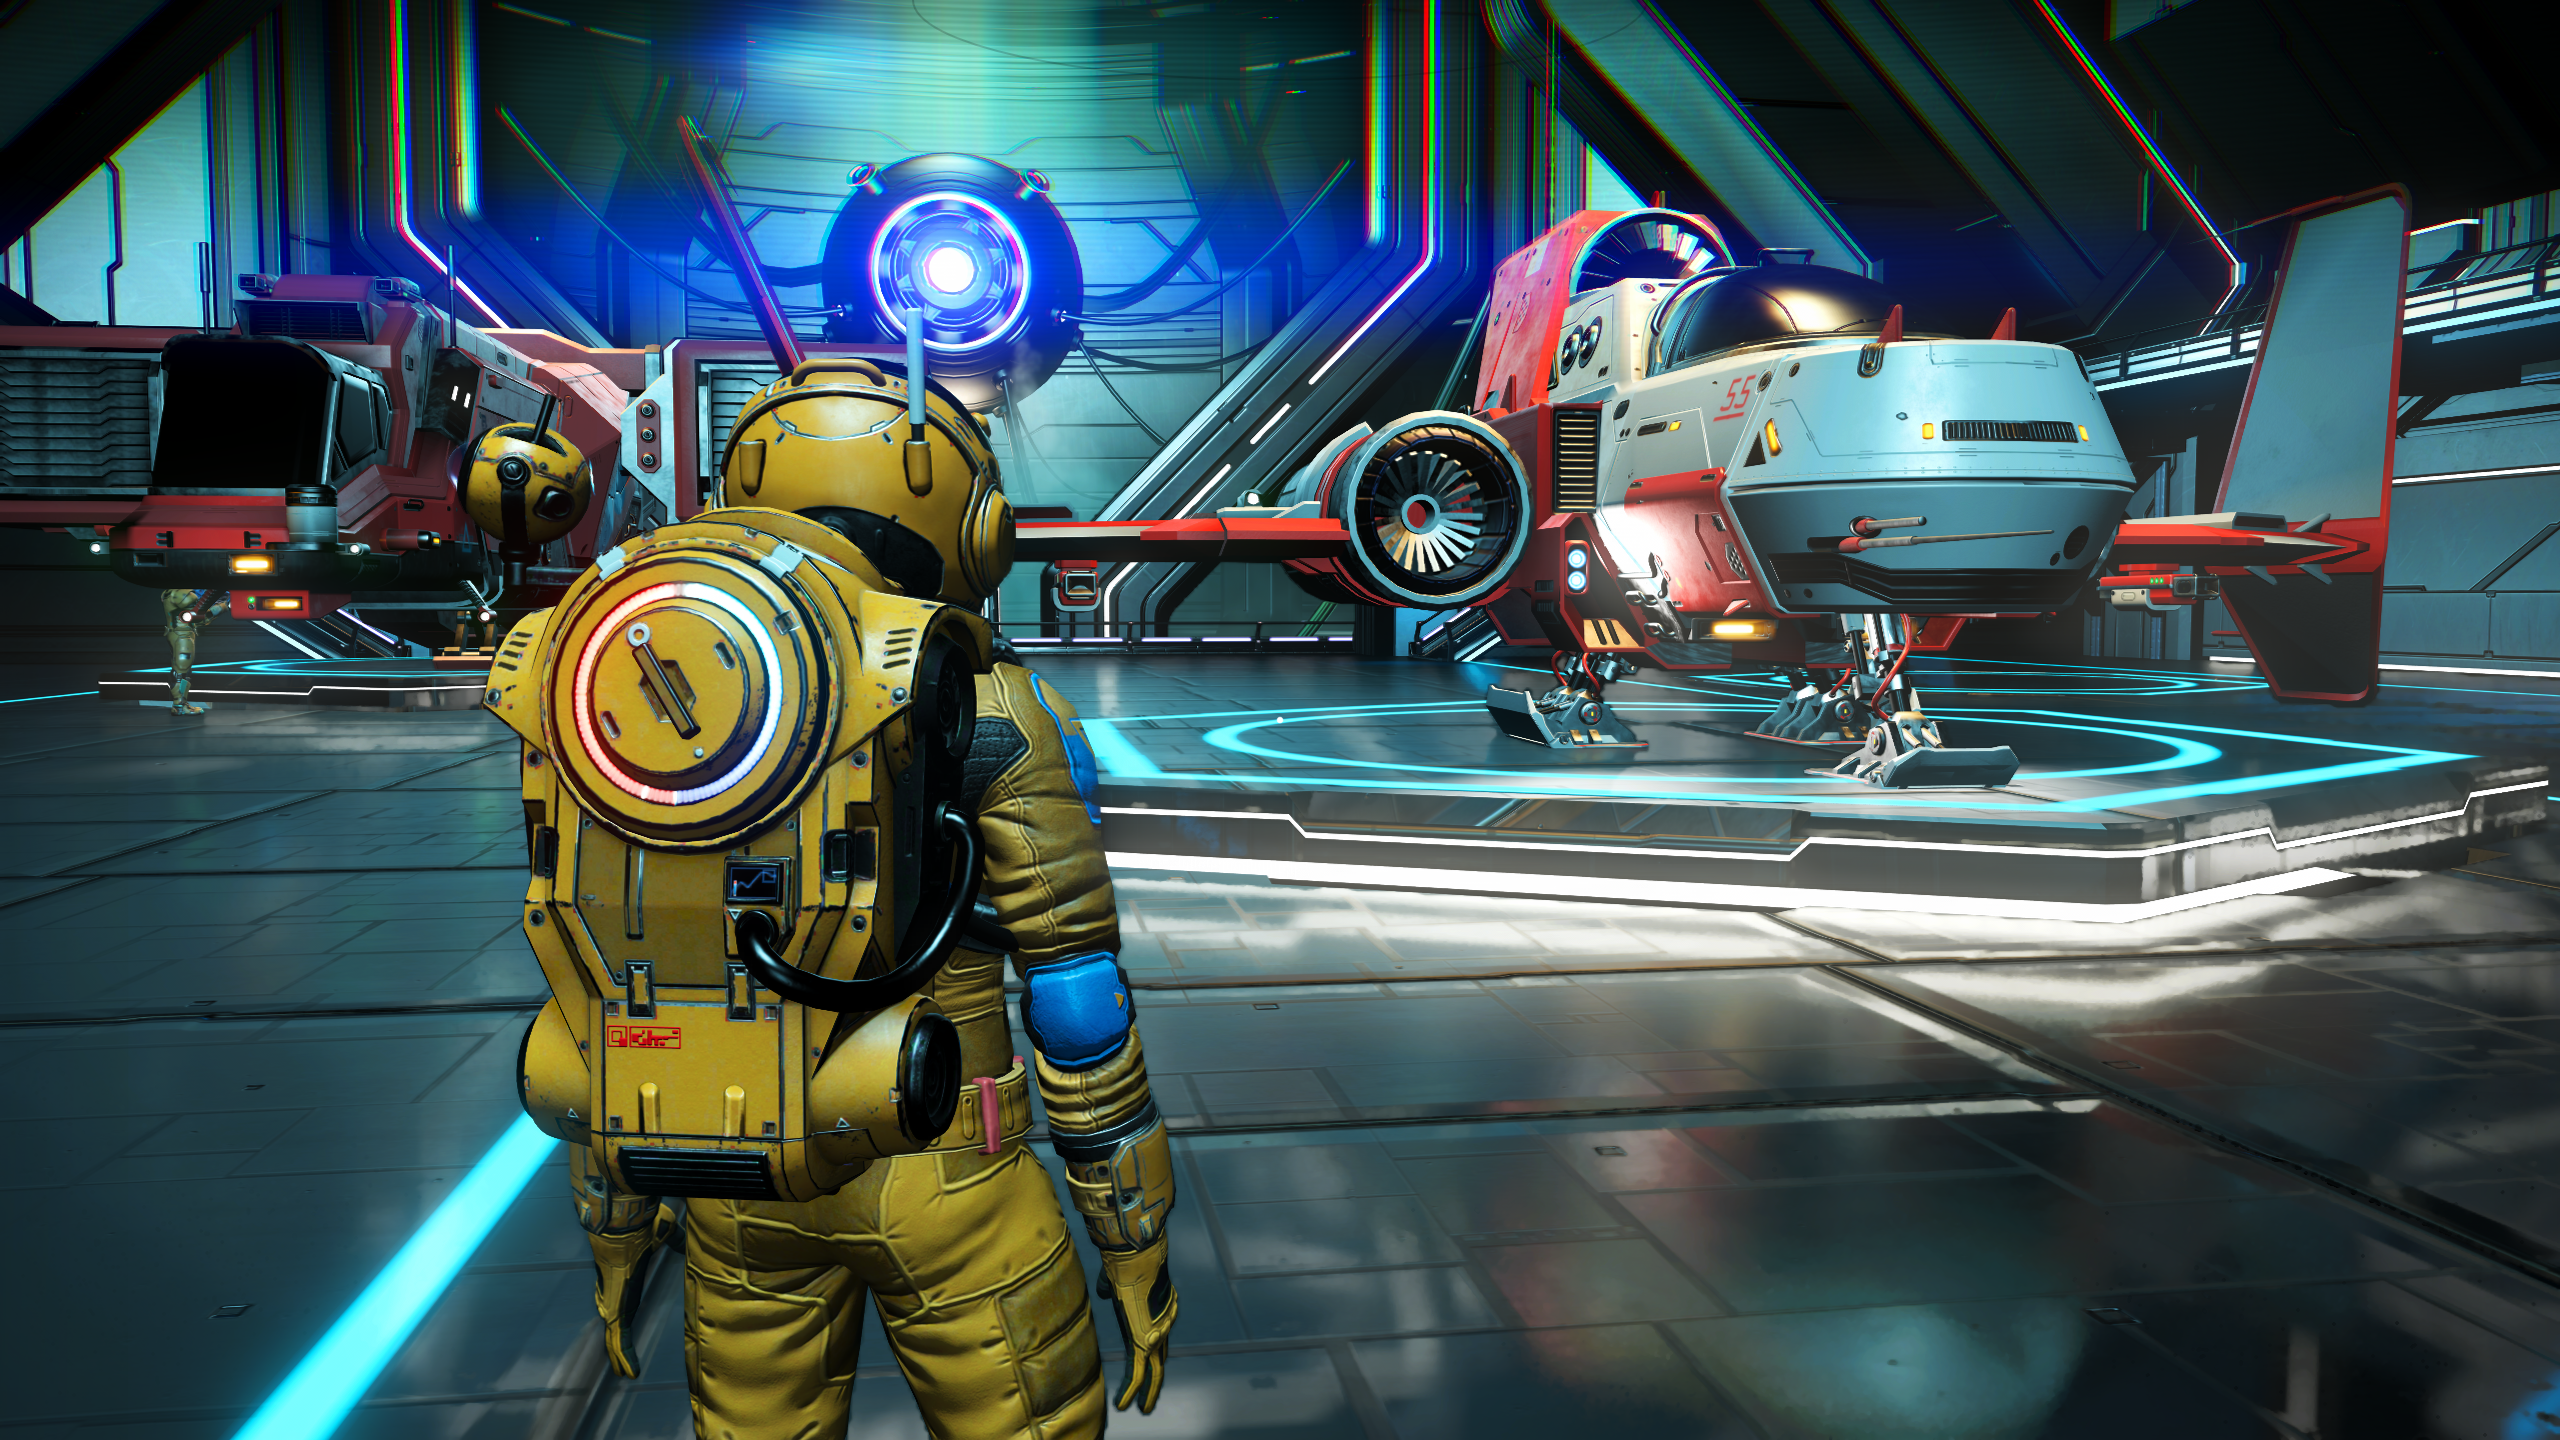 DLAA used in No Man's Sky. A spaceman stands in front of some spaceships within a hangar.